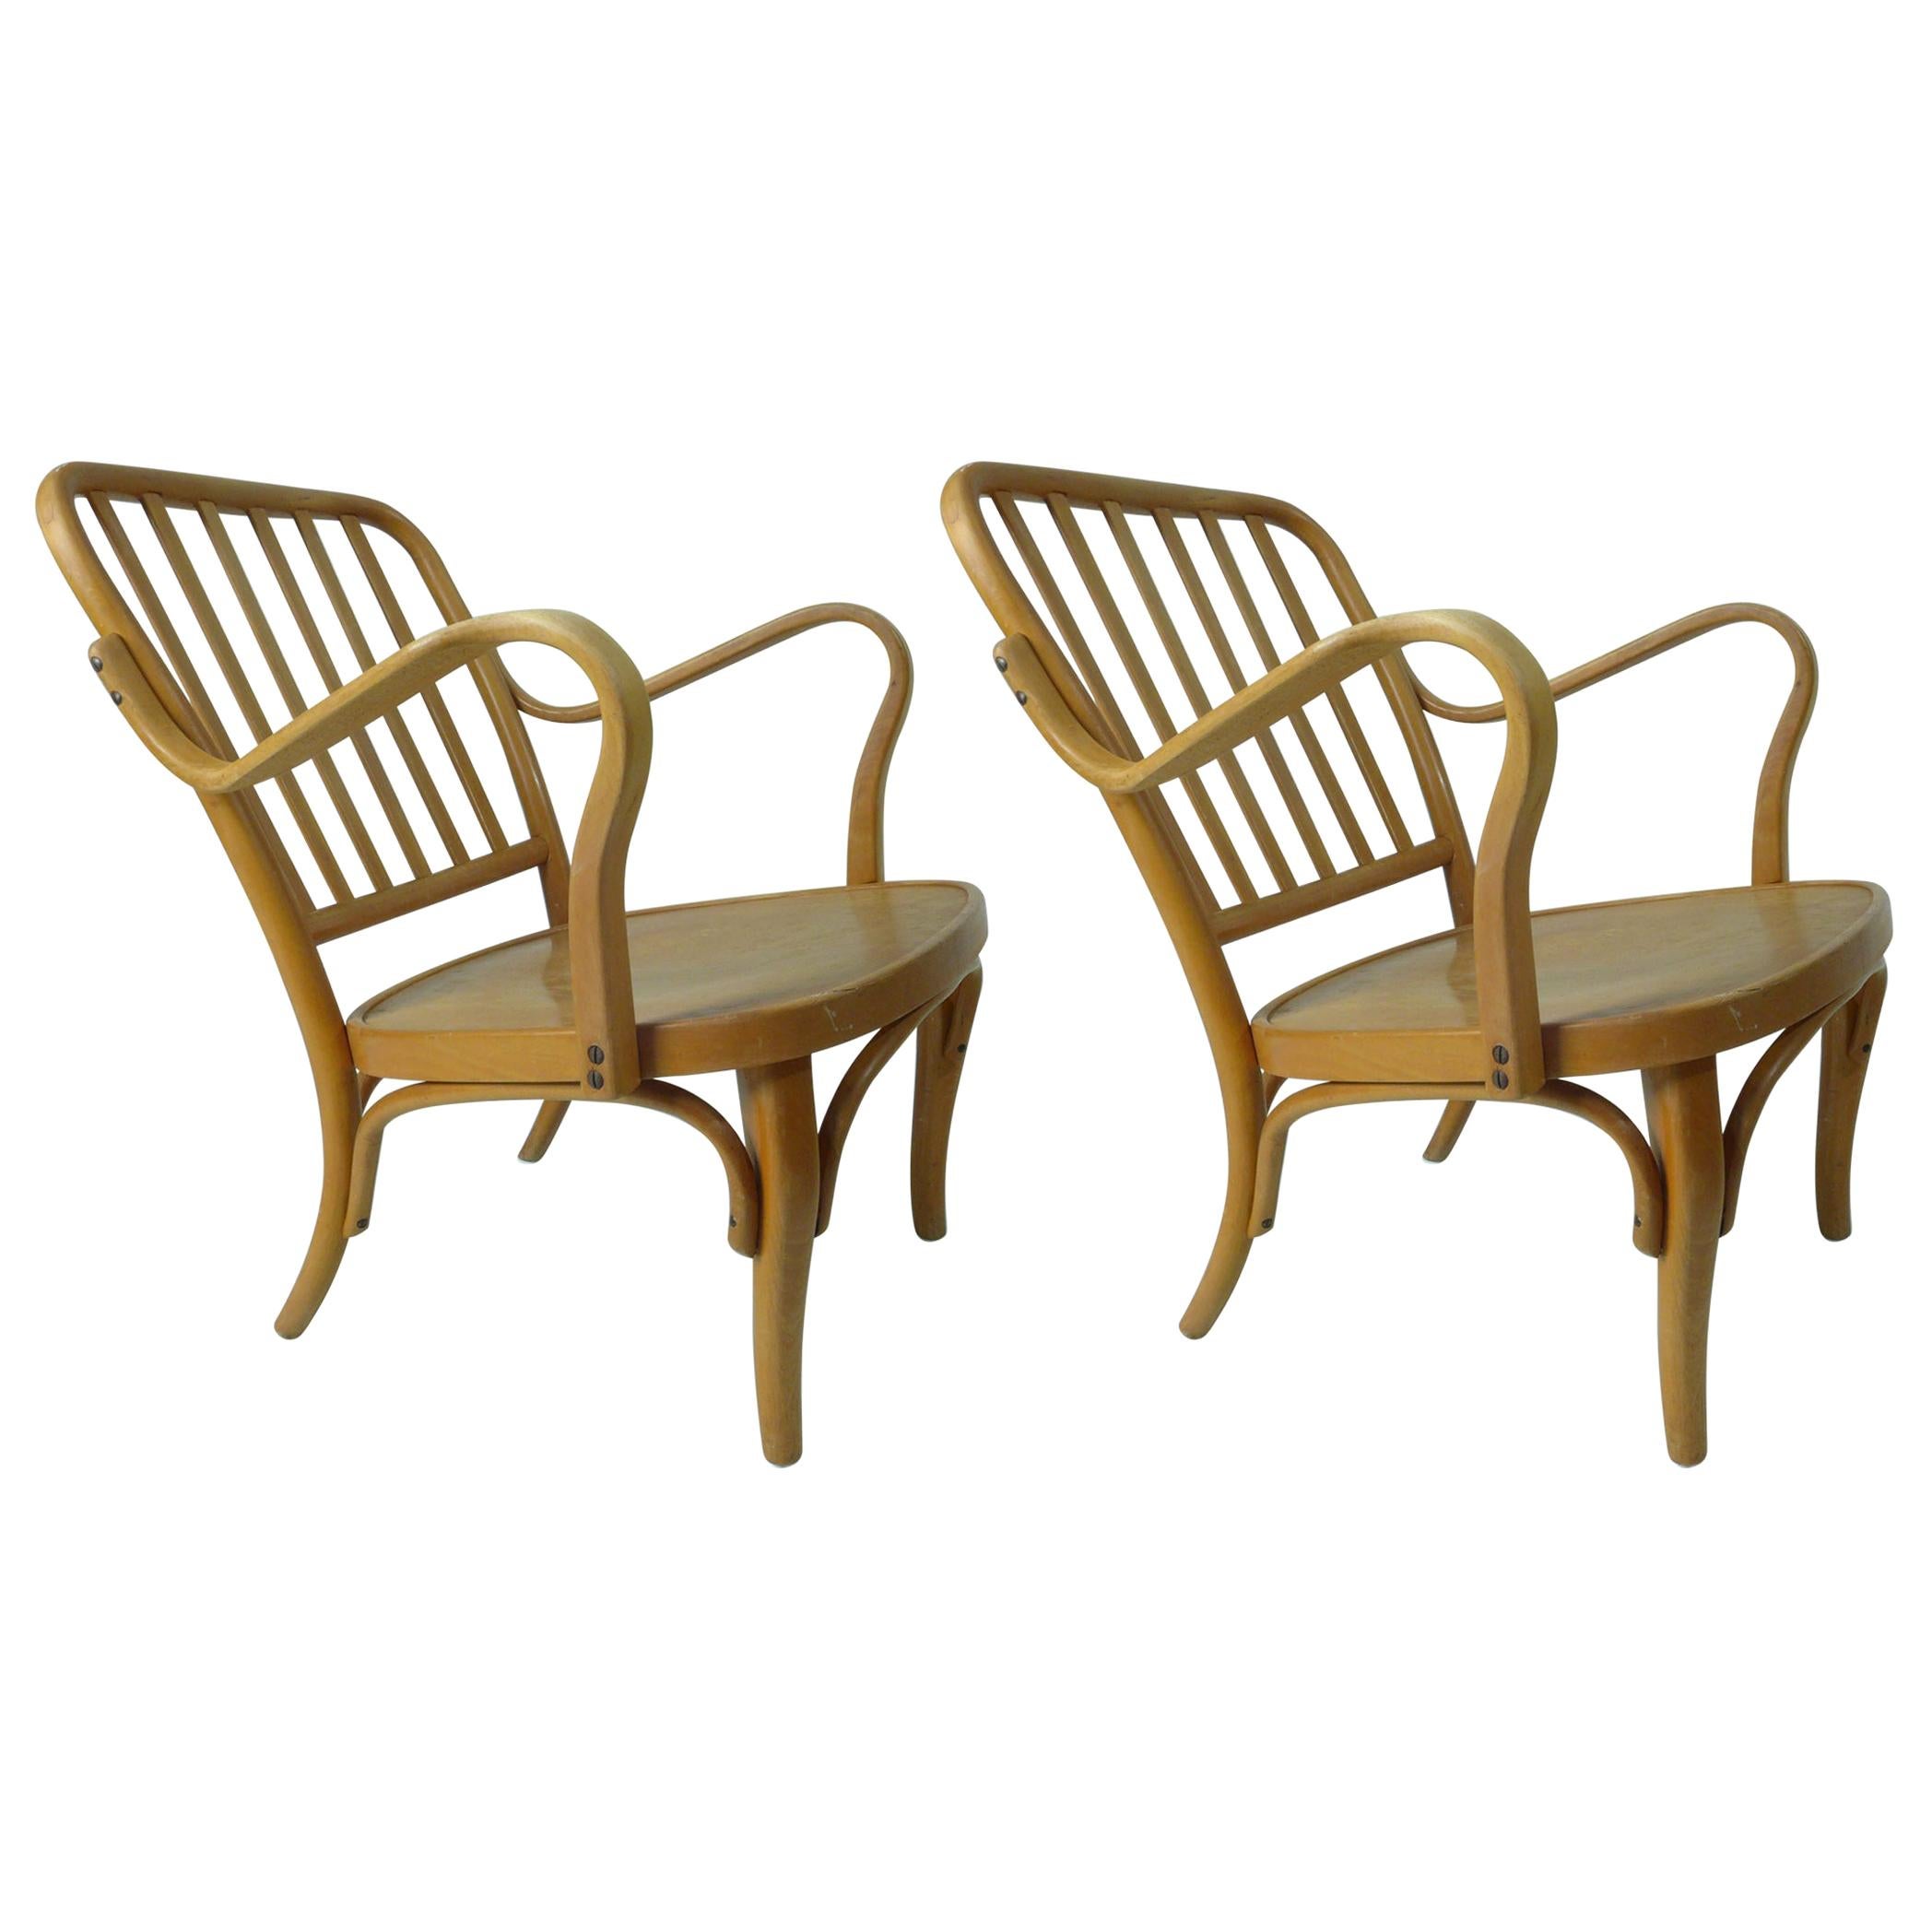 Pair of Thonet Armchairs by Josef Frank For Sale